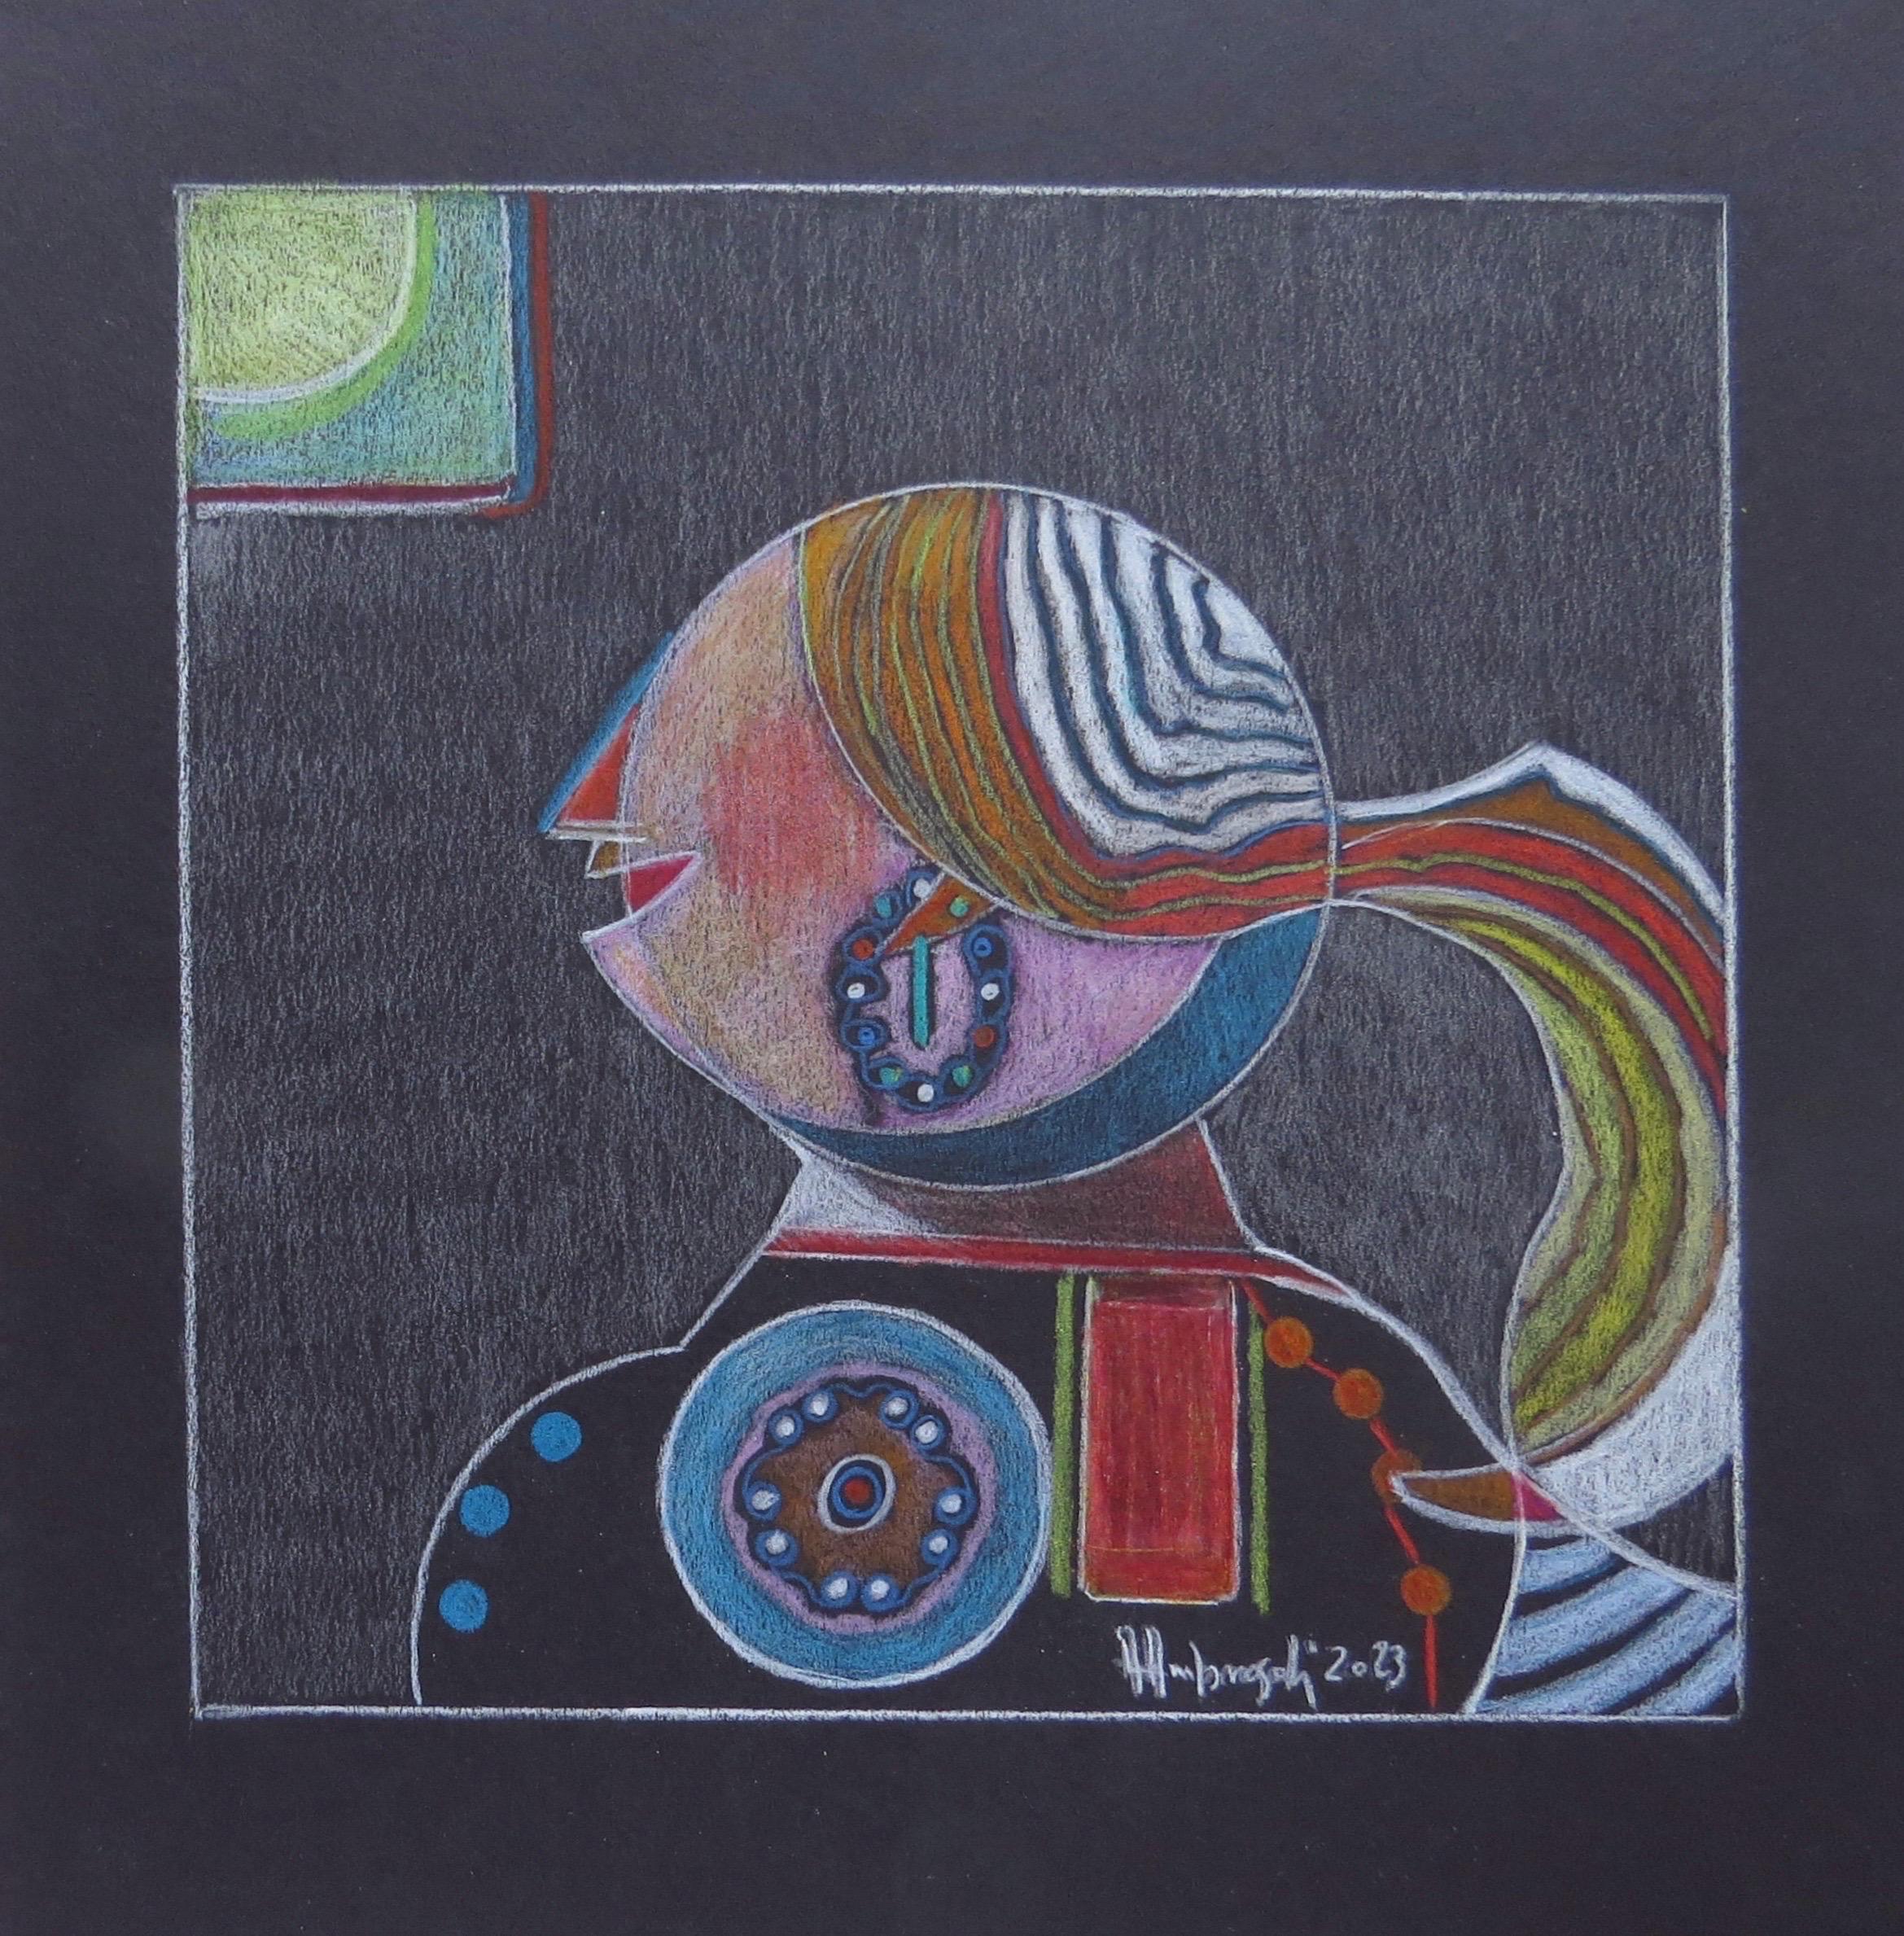 Shining (2023) cm 21x21, by Italian artist Annemarie Ambrosoli, is a colored drawing with color pencil on a black cardboard, that measures 29x26,5 cm.
This work is a one-of-a-kind piece. It is unframed. Hand-signed by the artist in the lower right